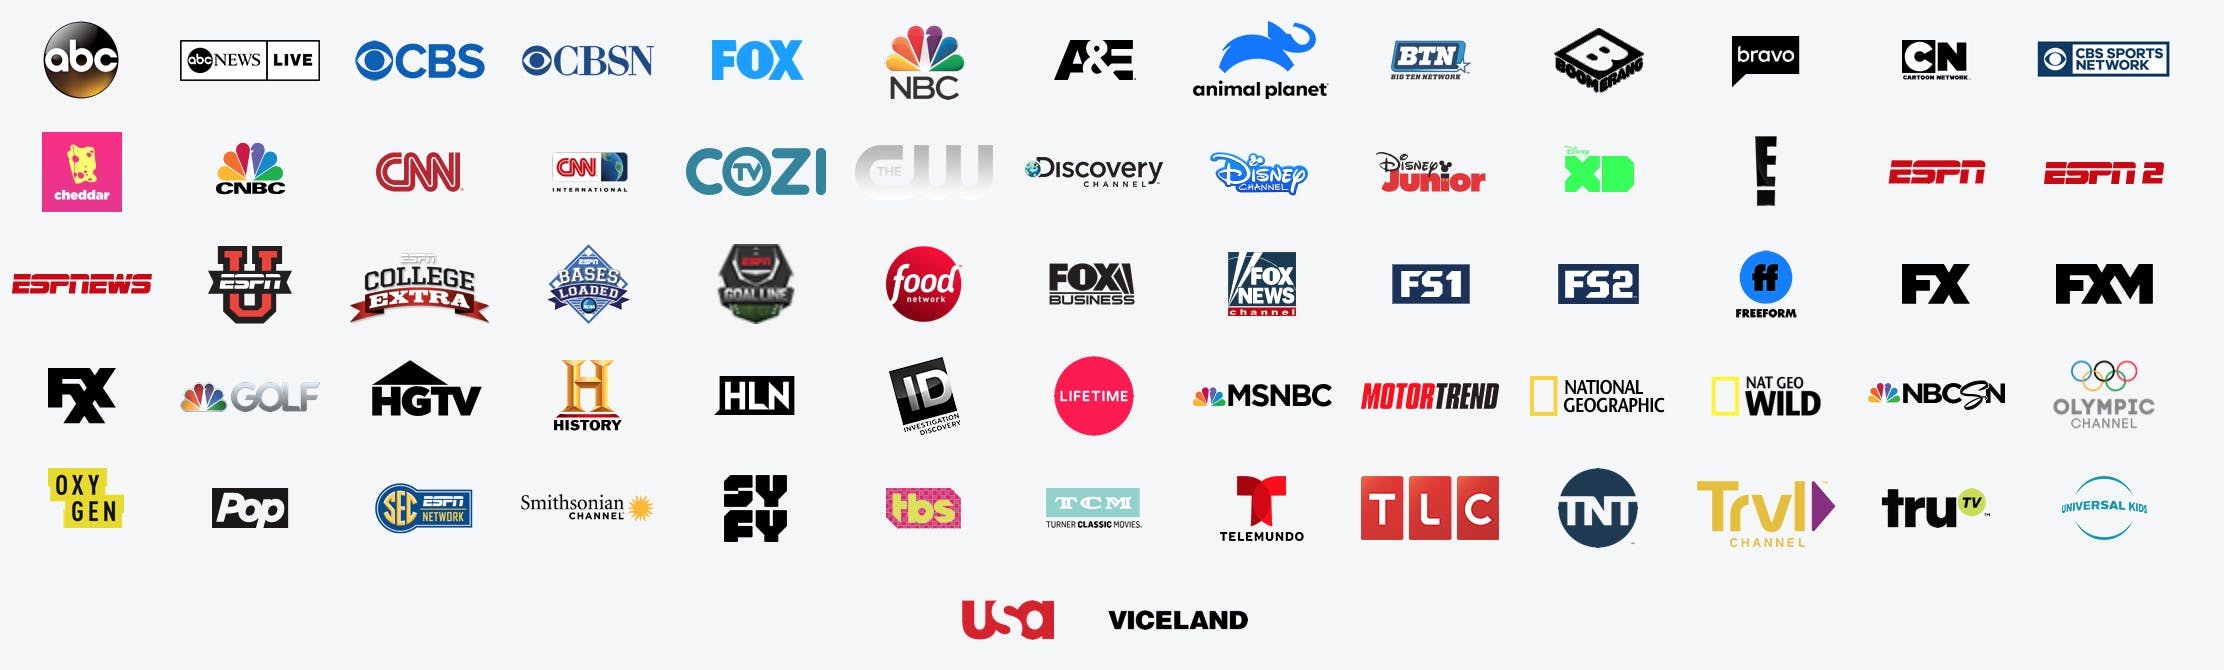 Playstation Vue competitors alternative Hulu with Live TV